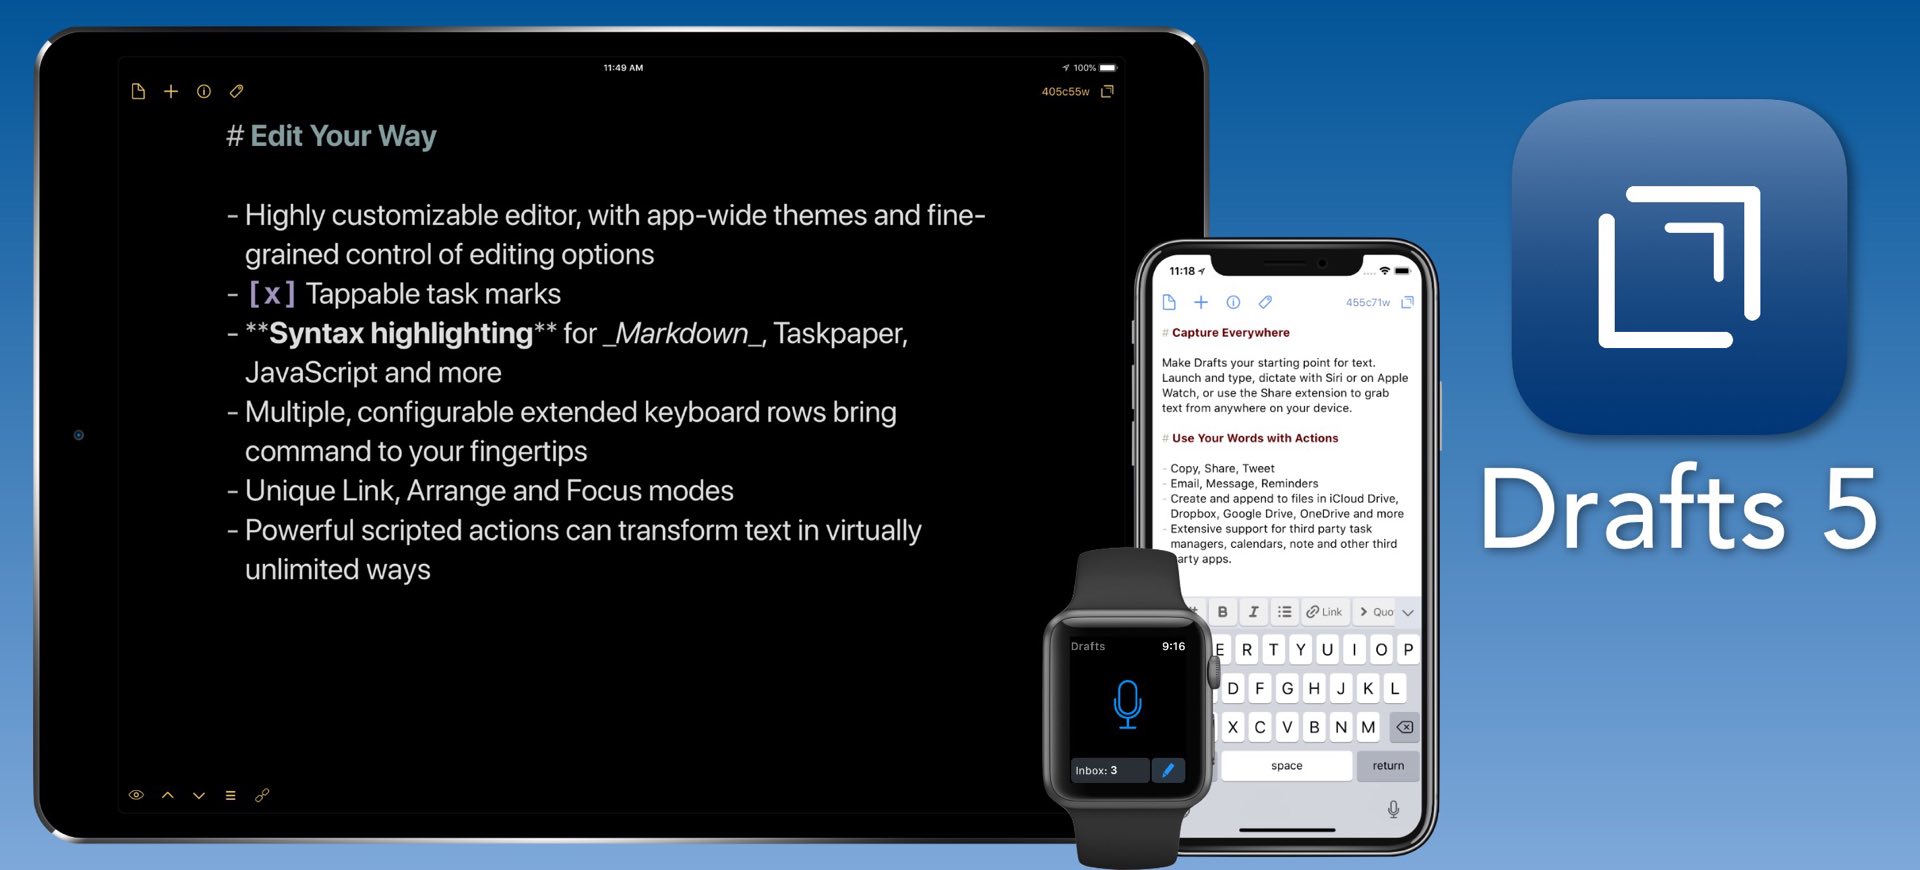 drafts-5-for-ios-and-apple-watch